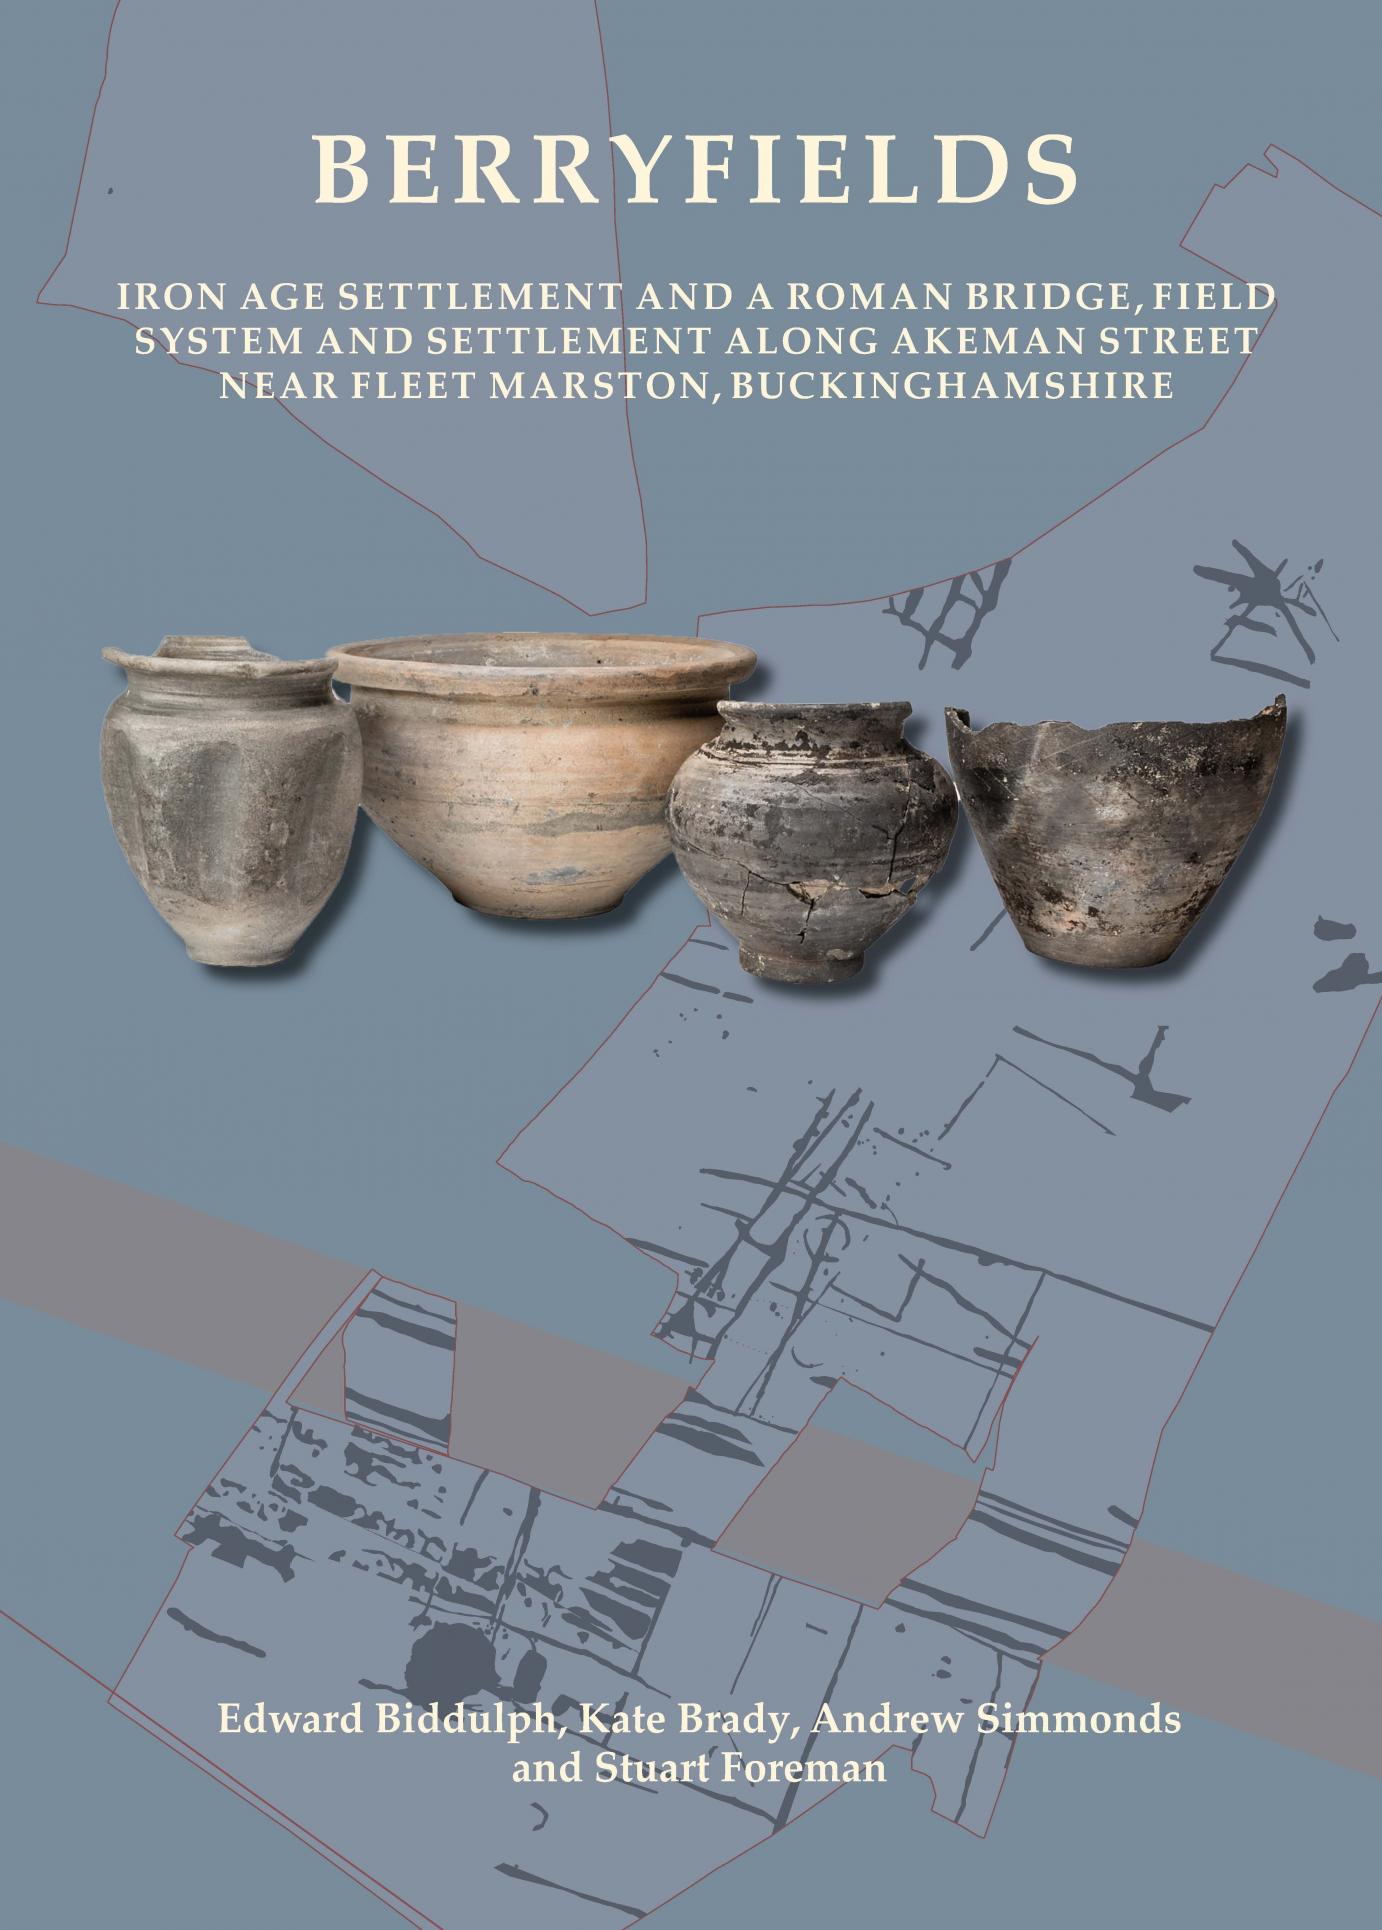 title page for publication of Berryfields with four pots and a plan of the excavation behind them